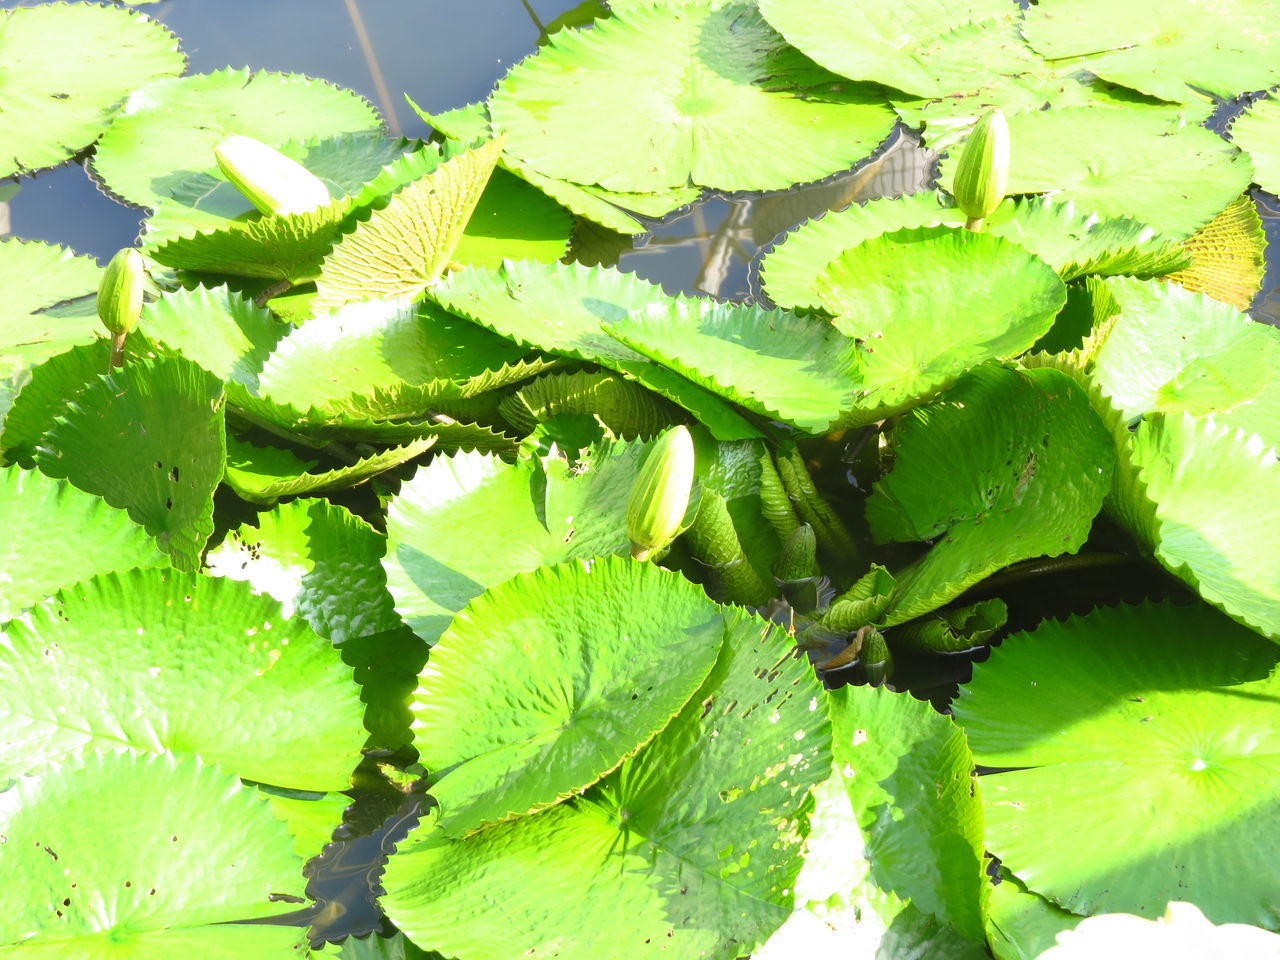 HIGH ANGLE VIEW OF FRESH GREEN LEAVES IN WATER